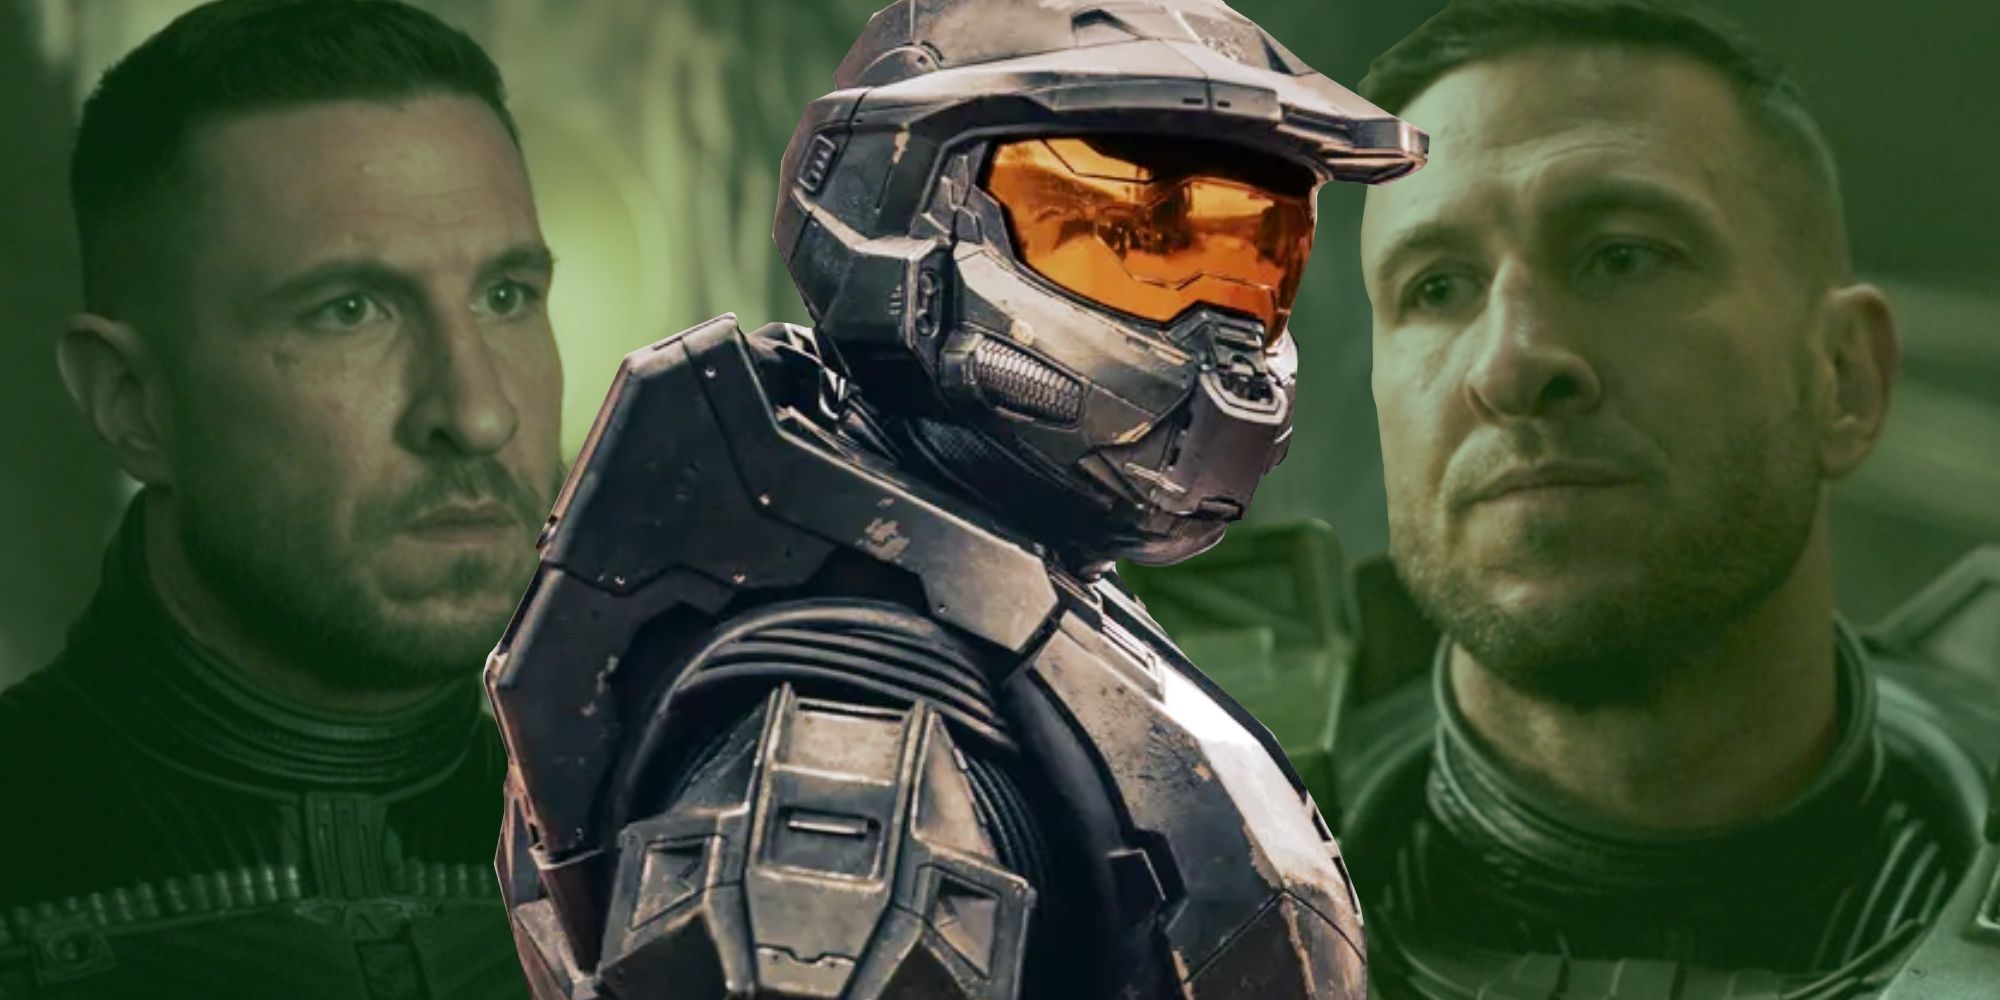 Master Chief John-117 is Back in First Teaser for 'Halo' Series